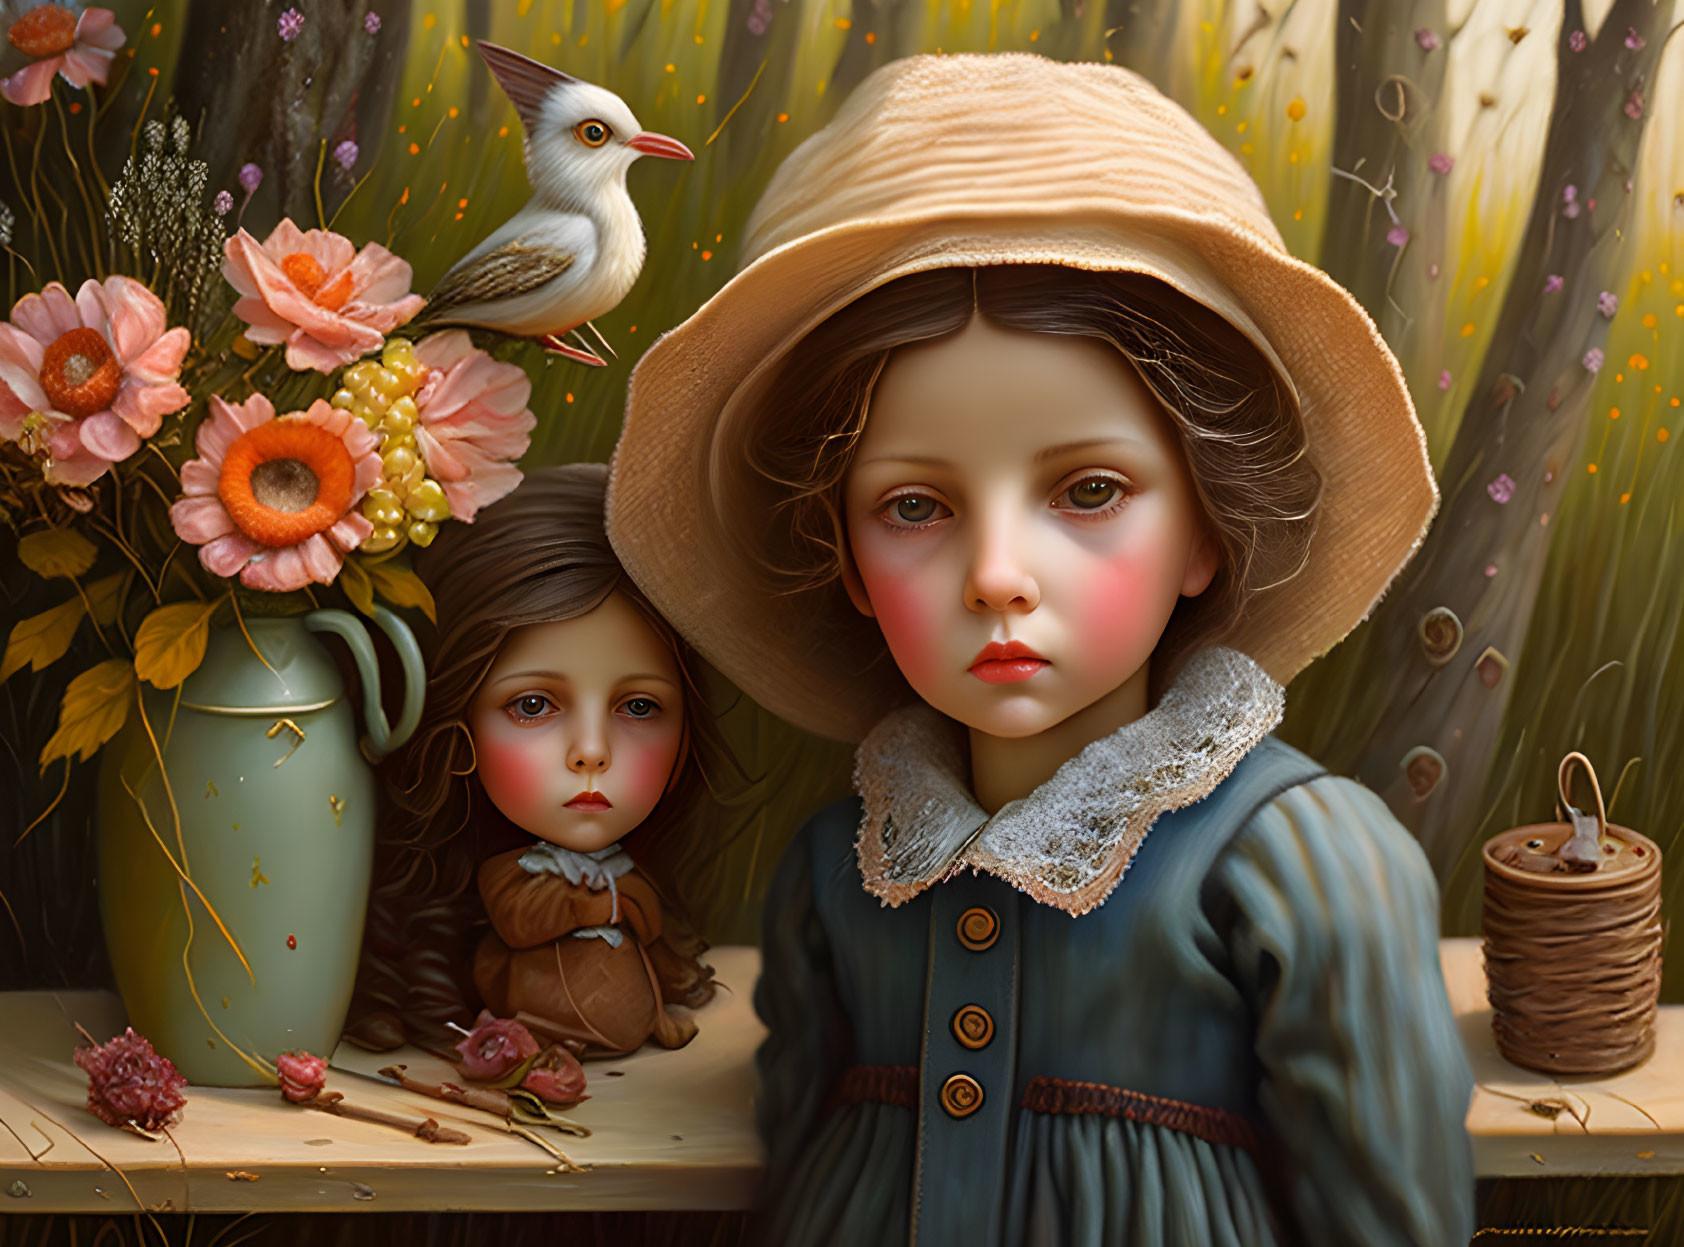 Stylized children with expressive eyes in vintage clothing surrounded by flowers and a bird.